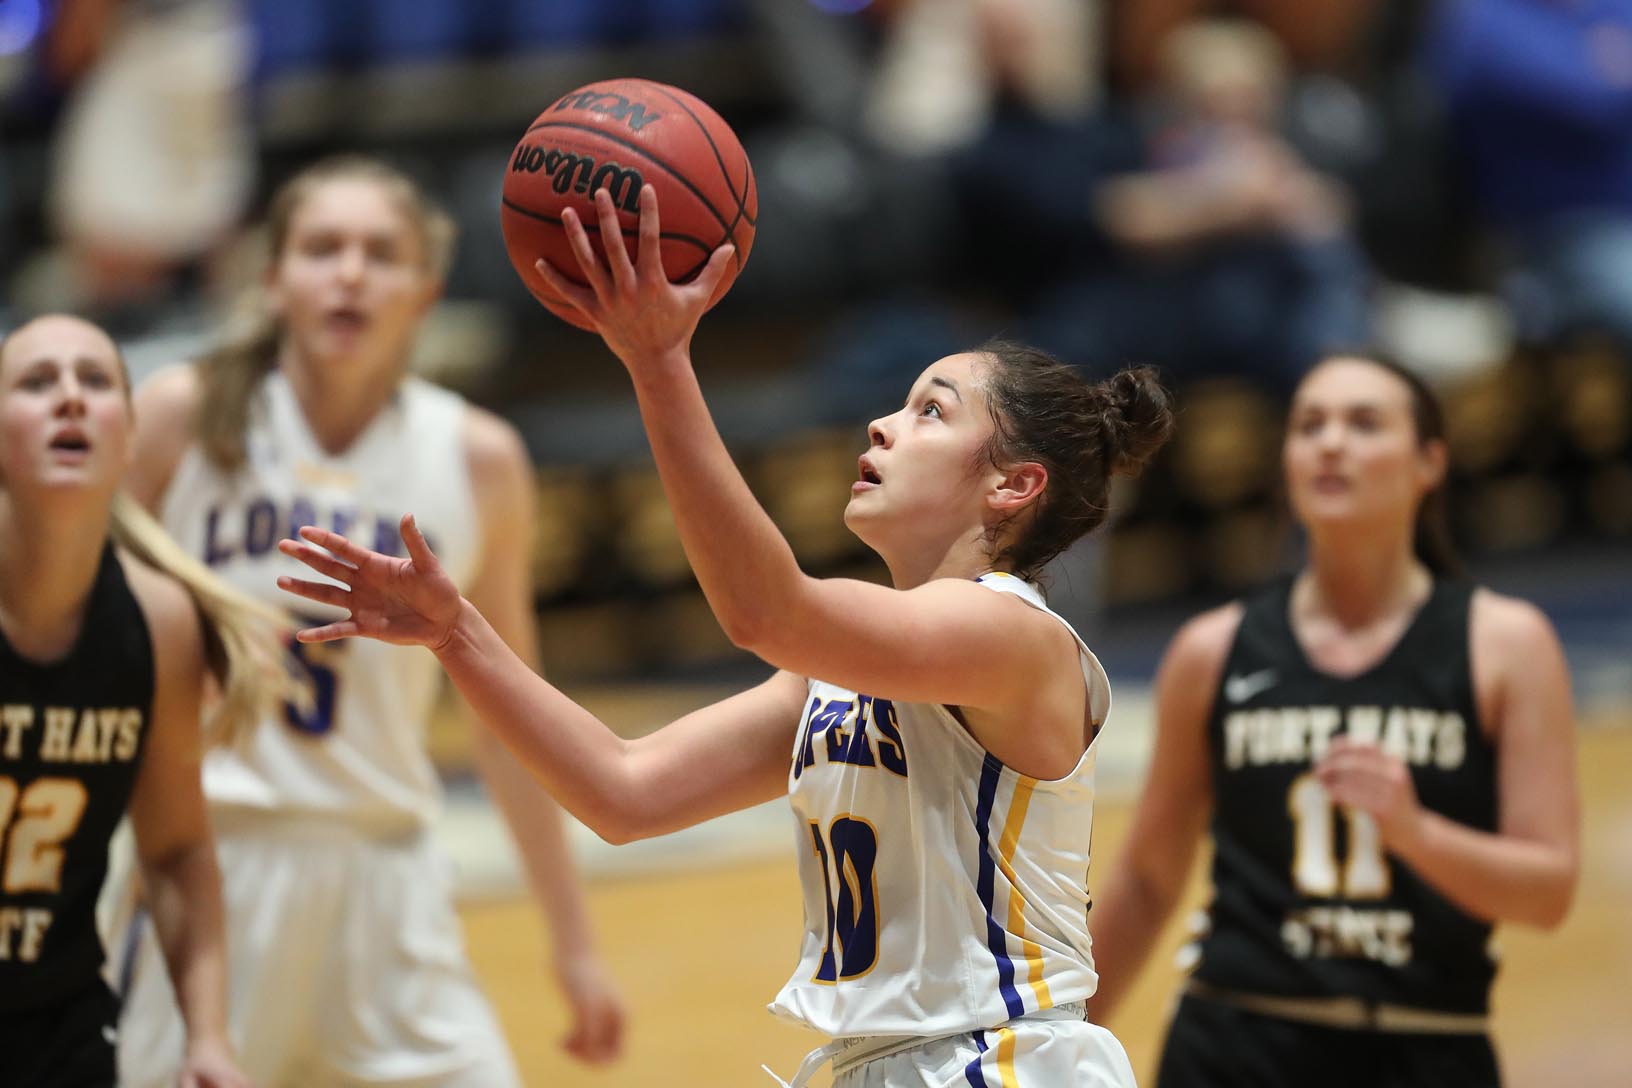 Haley Simental, who spent four seasons at the University of Denver before transferring to UNK, is averaging a team-best 12.2 points per game in her first season with the Lopers. She also leads the team in minutes played (723), 3-pointers (56) and assists (92). (Photos by Corbey R. Dorsey, UNK Communications)